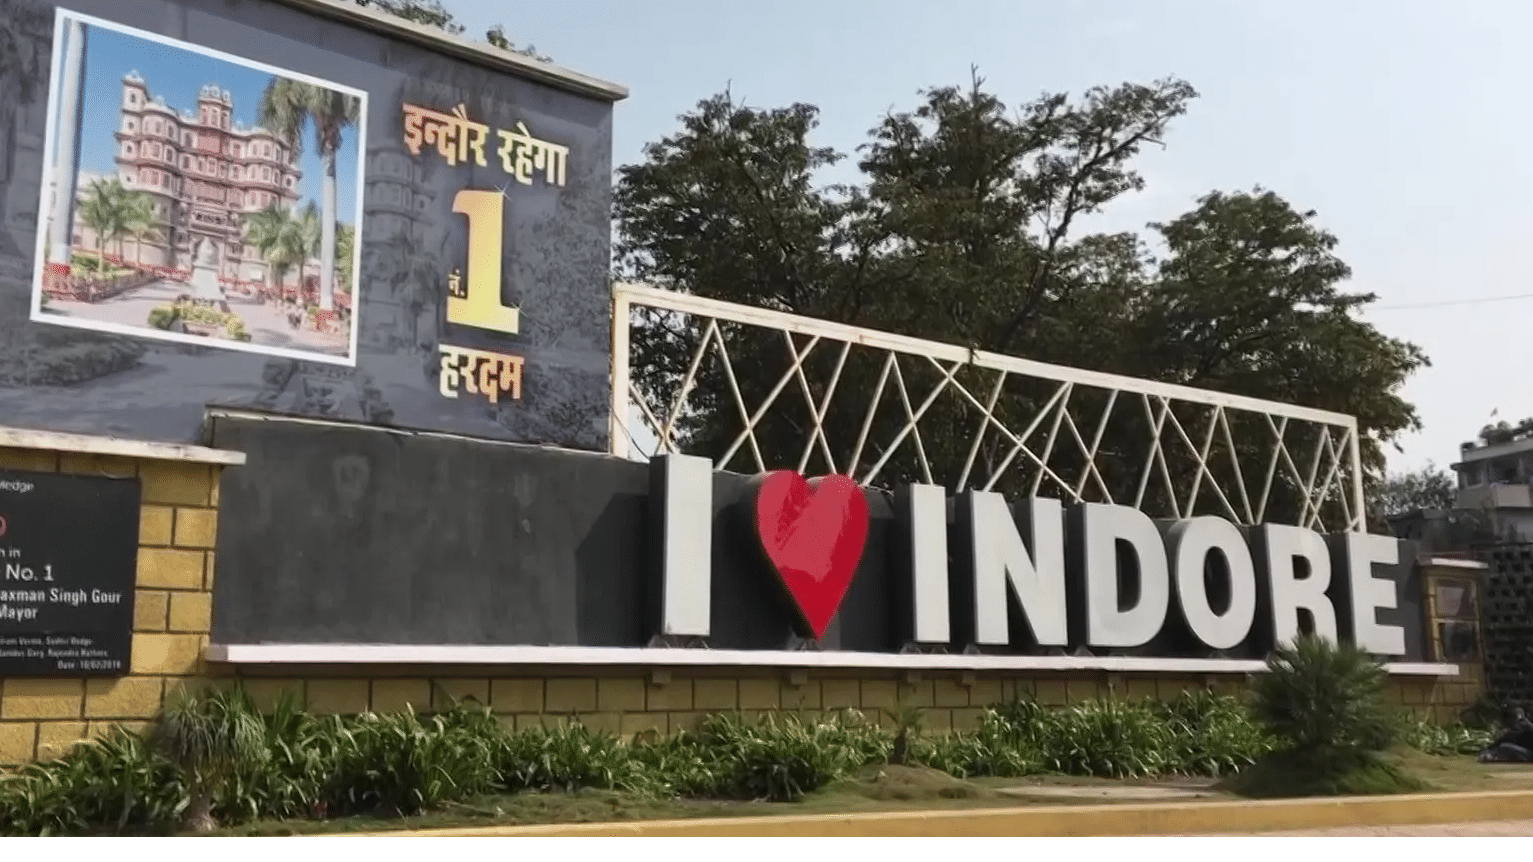 Indore, India’s cleanest city, becomes the first water plus city in country